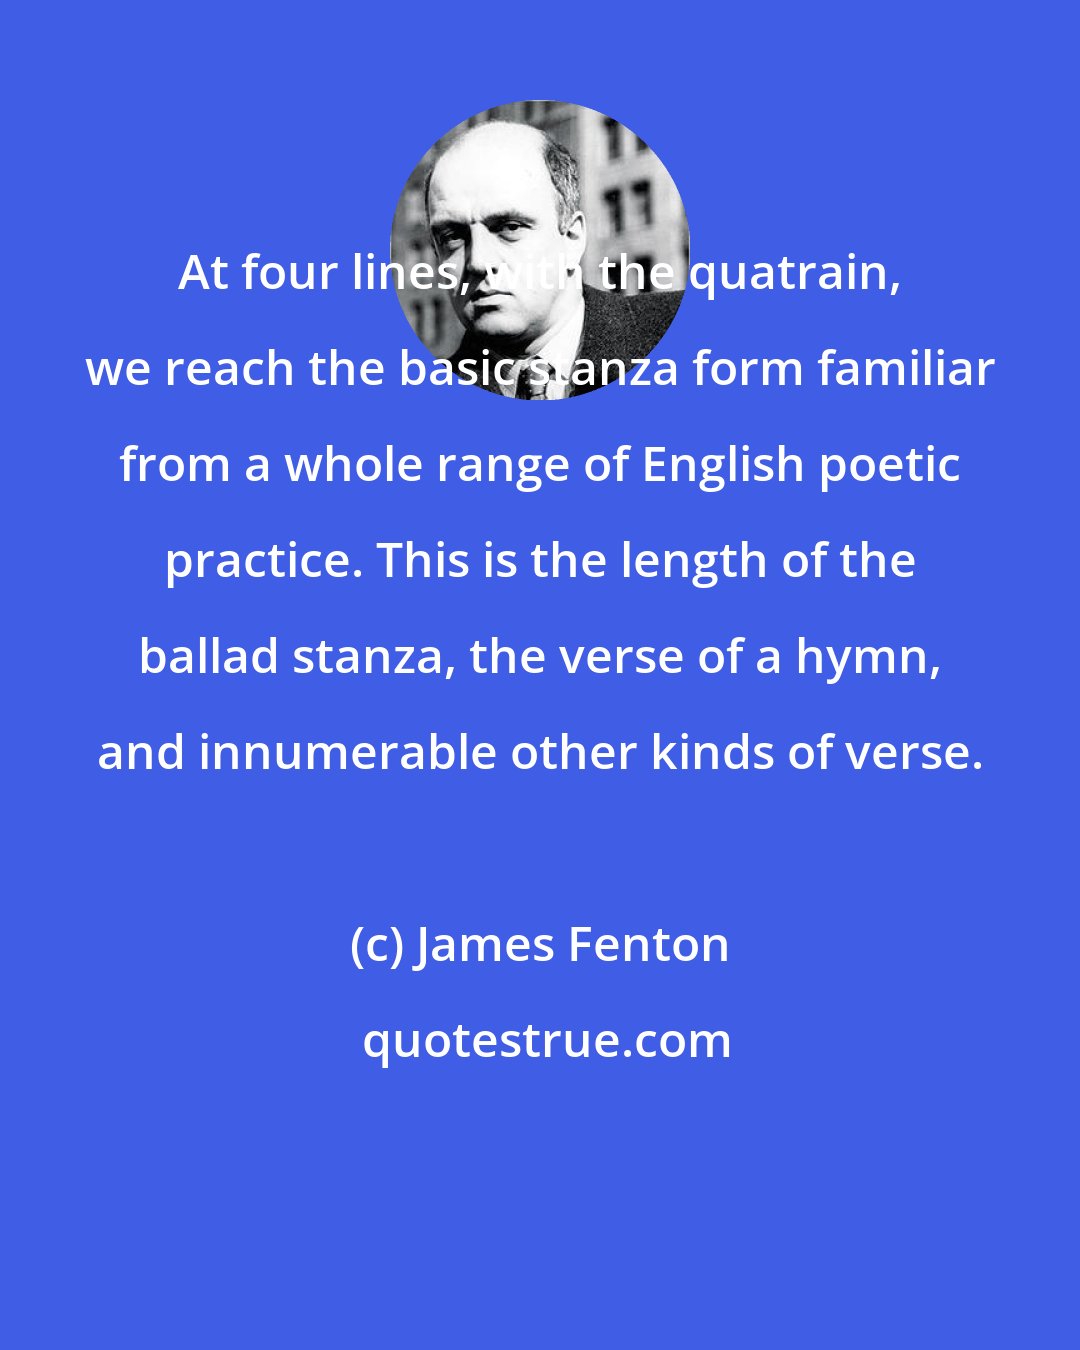 James Fenton: At four lines, with the quatrain, we reach the basic stanza form familiar from a whole range of English poetic practice. This is the length of the ballad stanza, the verse of a hymn, and innumerable other kinds of verse.